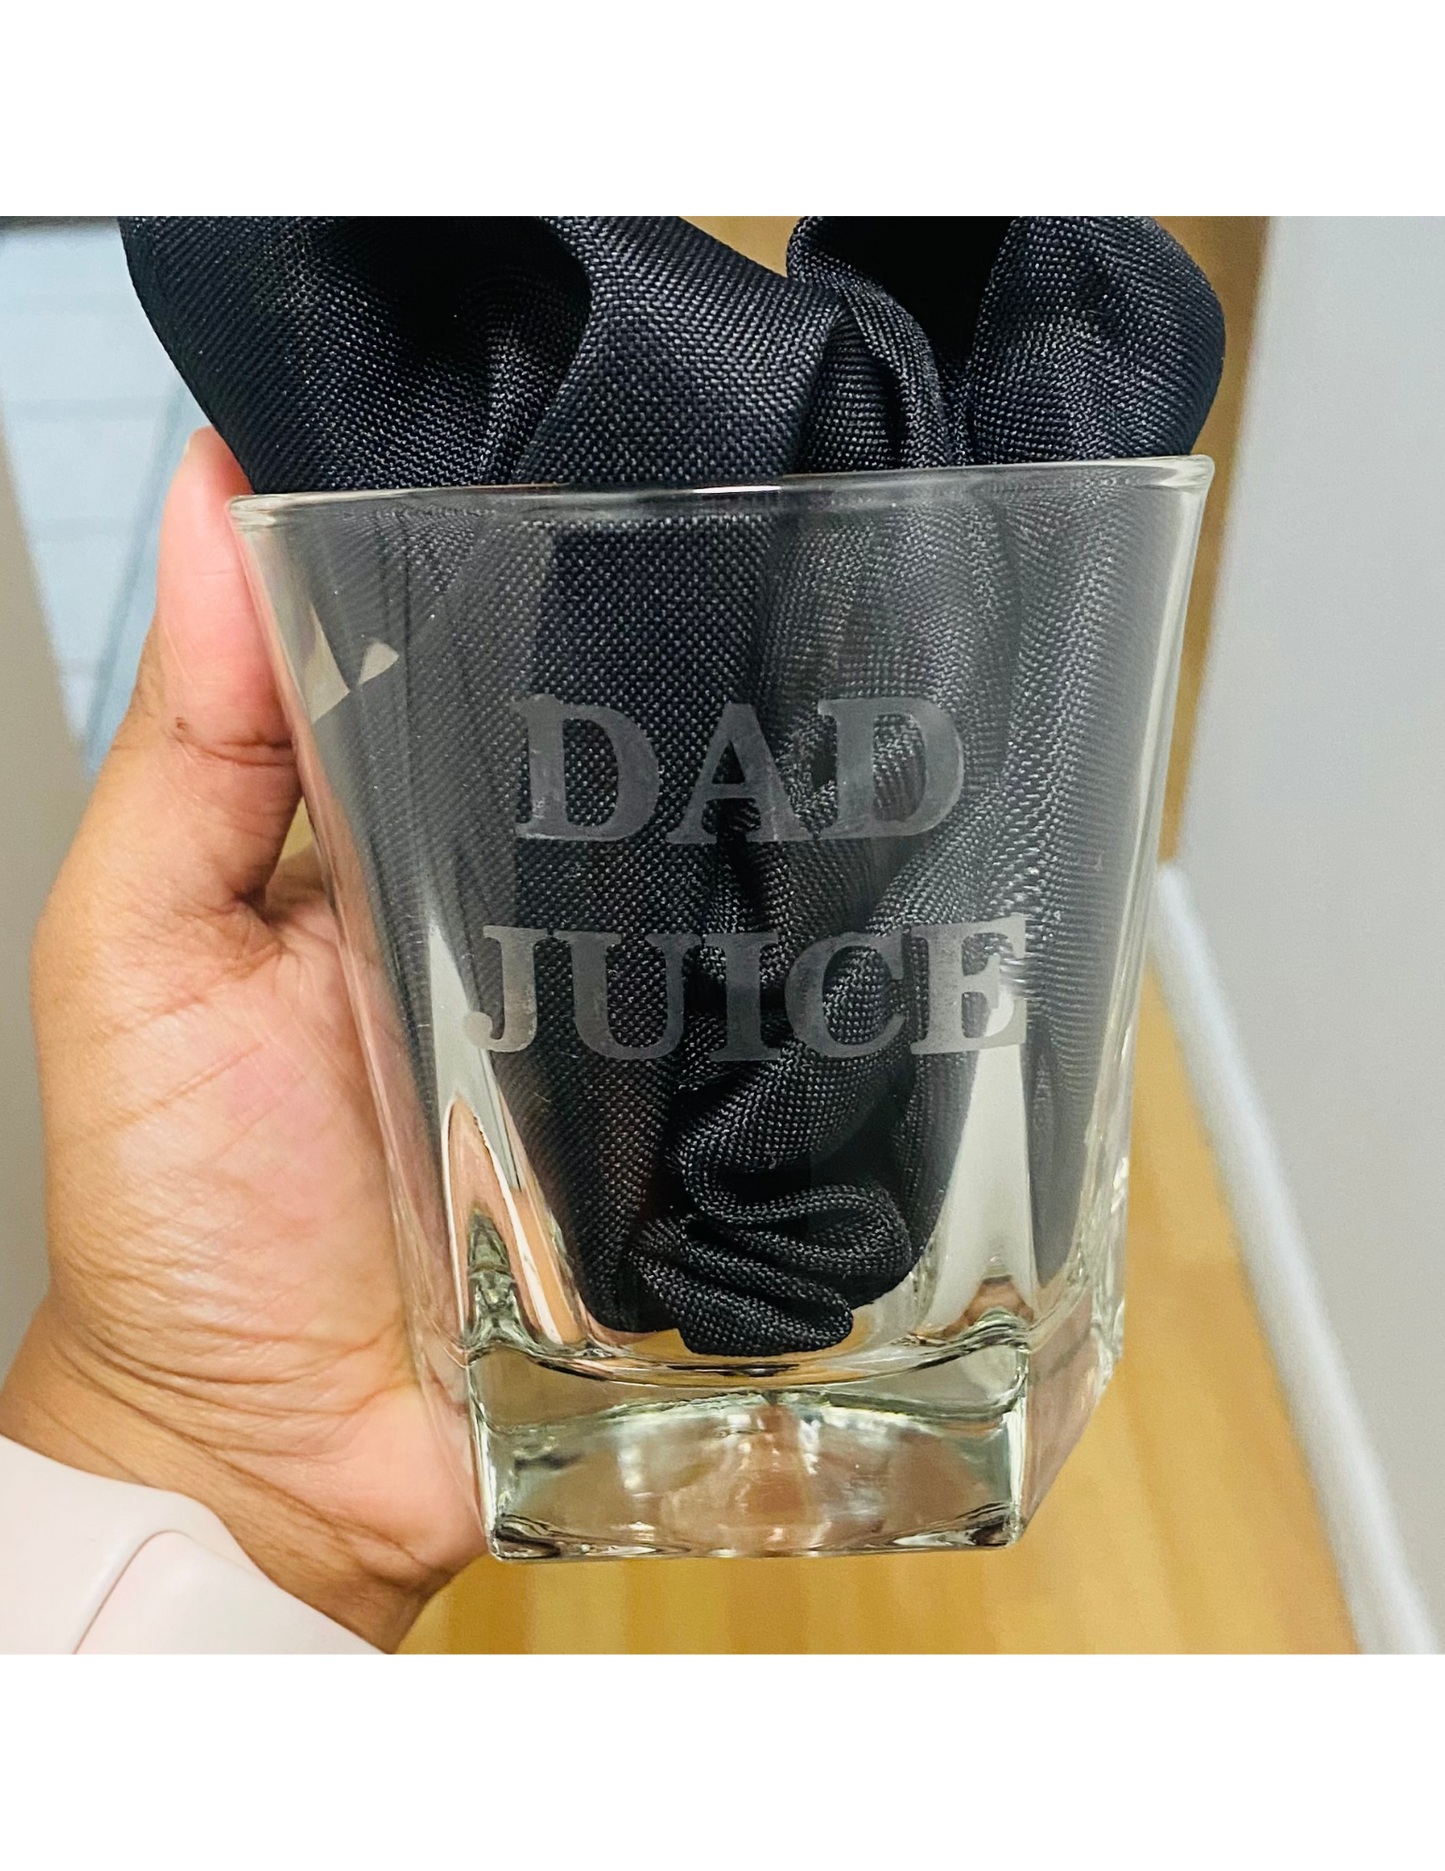 DAD JUICE Whiskey Glass